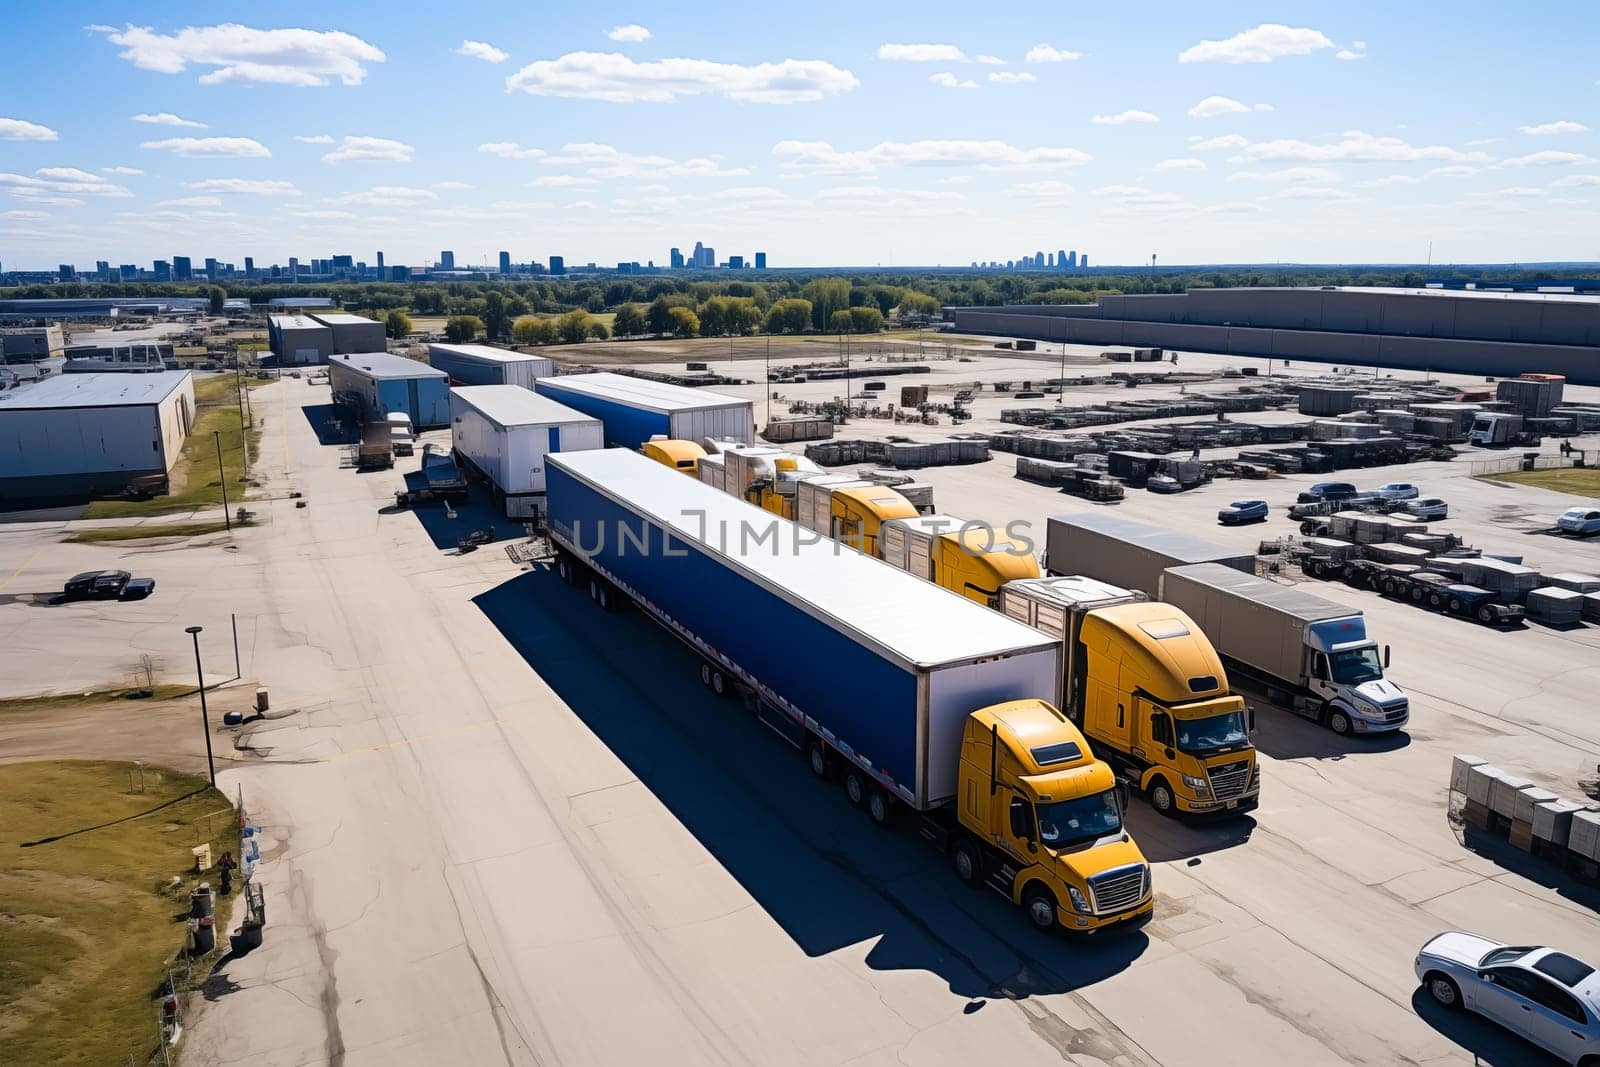 Aerial Shot of Industrial Warehouse Loading Dock where Many Truck with Semi Trailers Load Merchandise. by sarymsakov